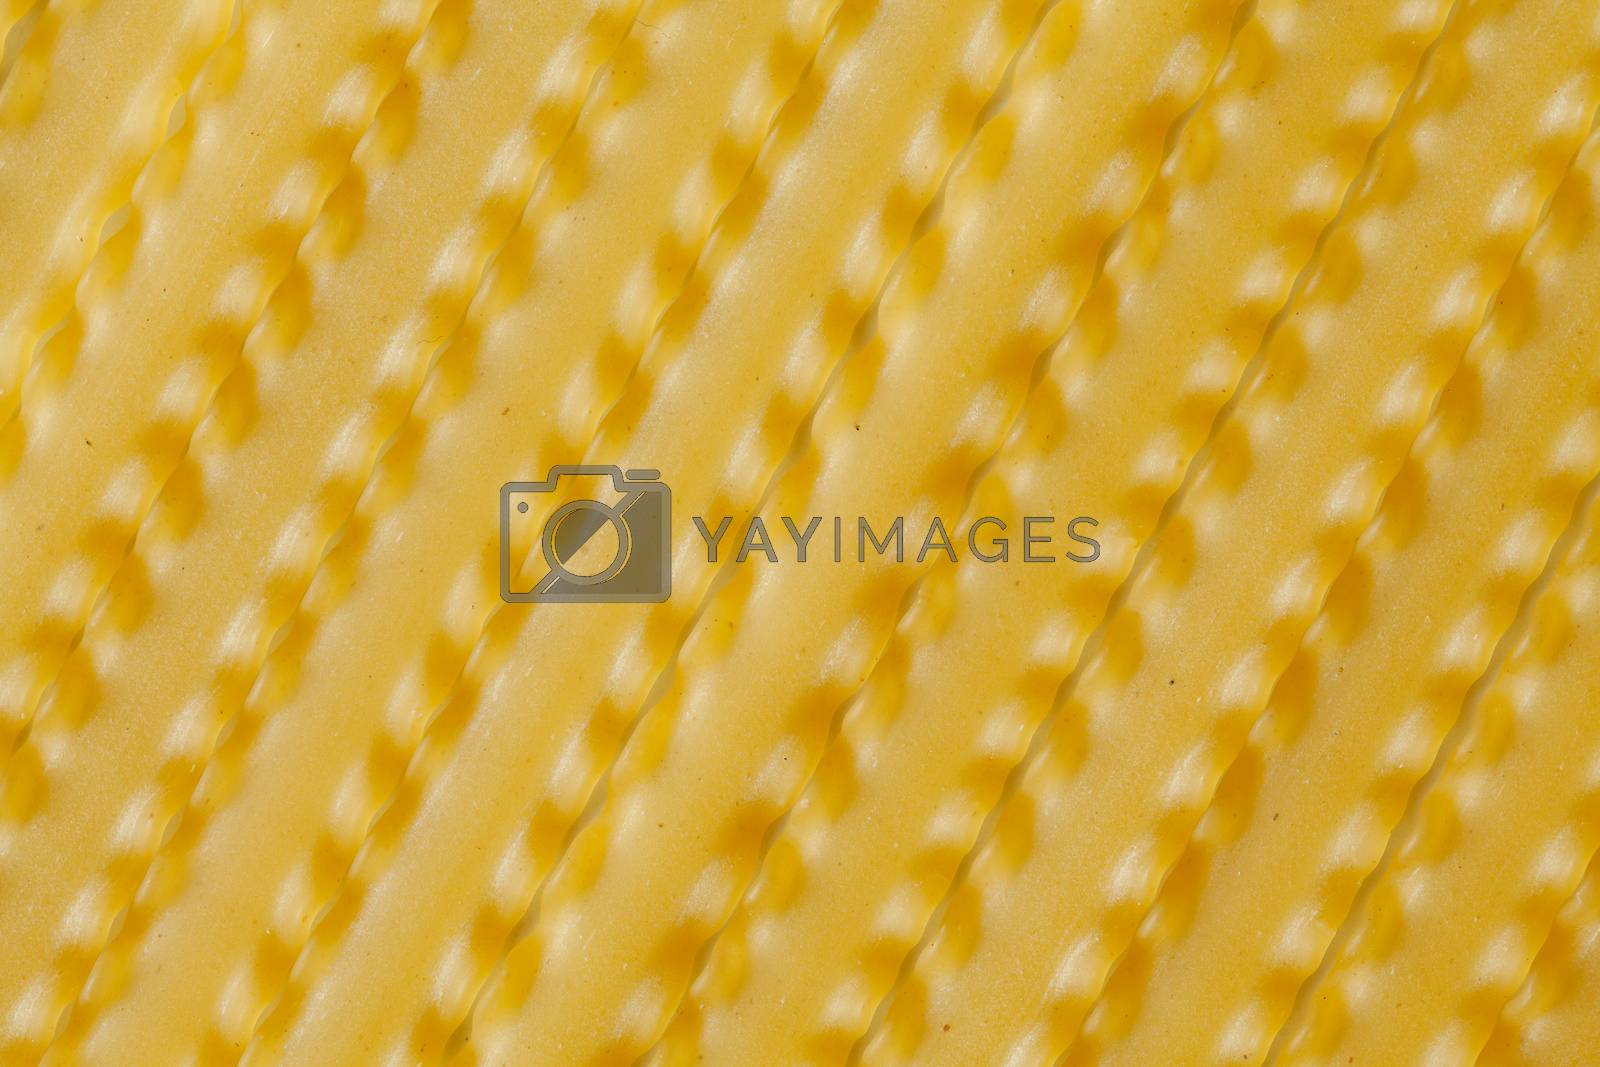 Royalty free image of Pasta Texture by mpessaris